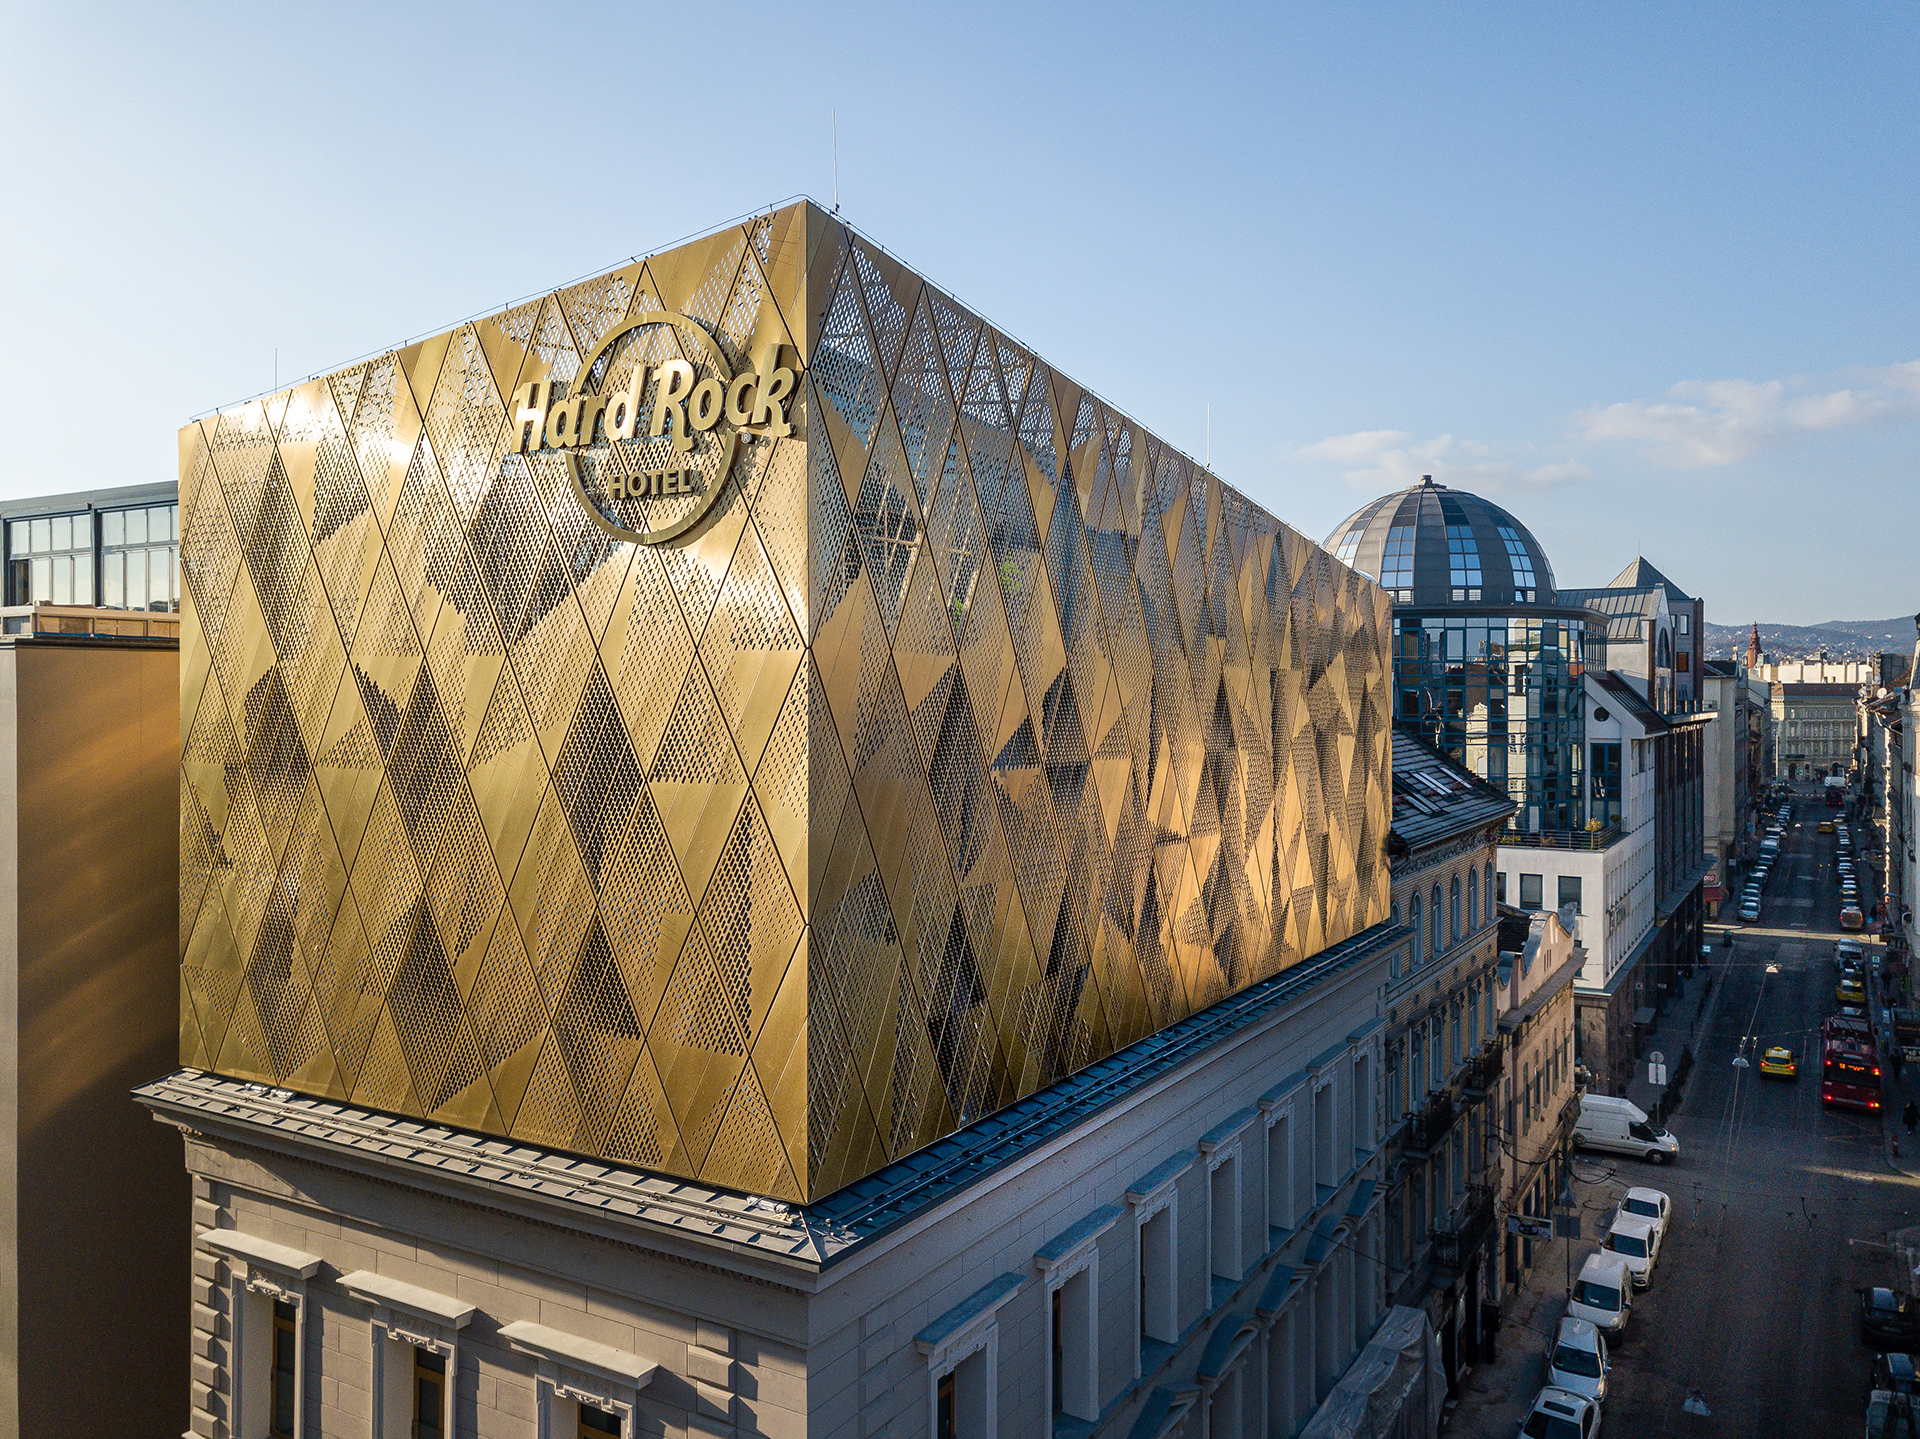 View of the main corner of the Hard Rock hotel located in Budapest, Hungary. The Hard Rock logo is visible in the corner. The gold-coloured walls are clad from Nordic Royal copper.